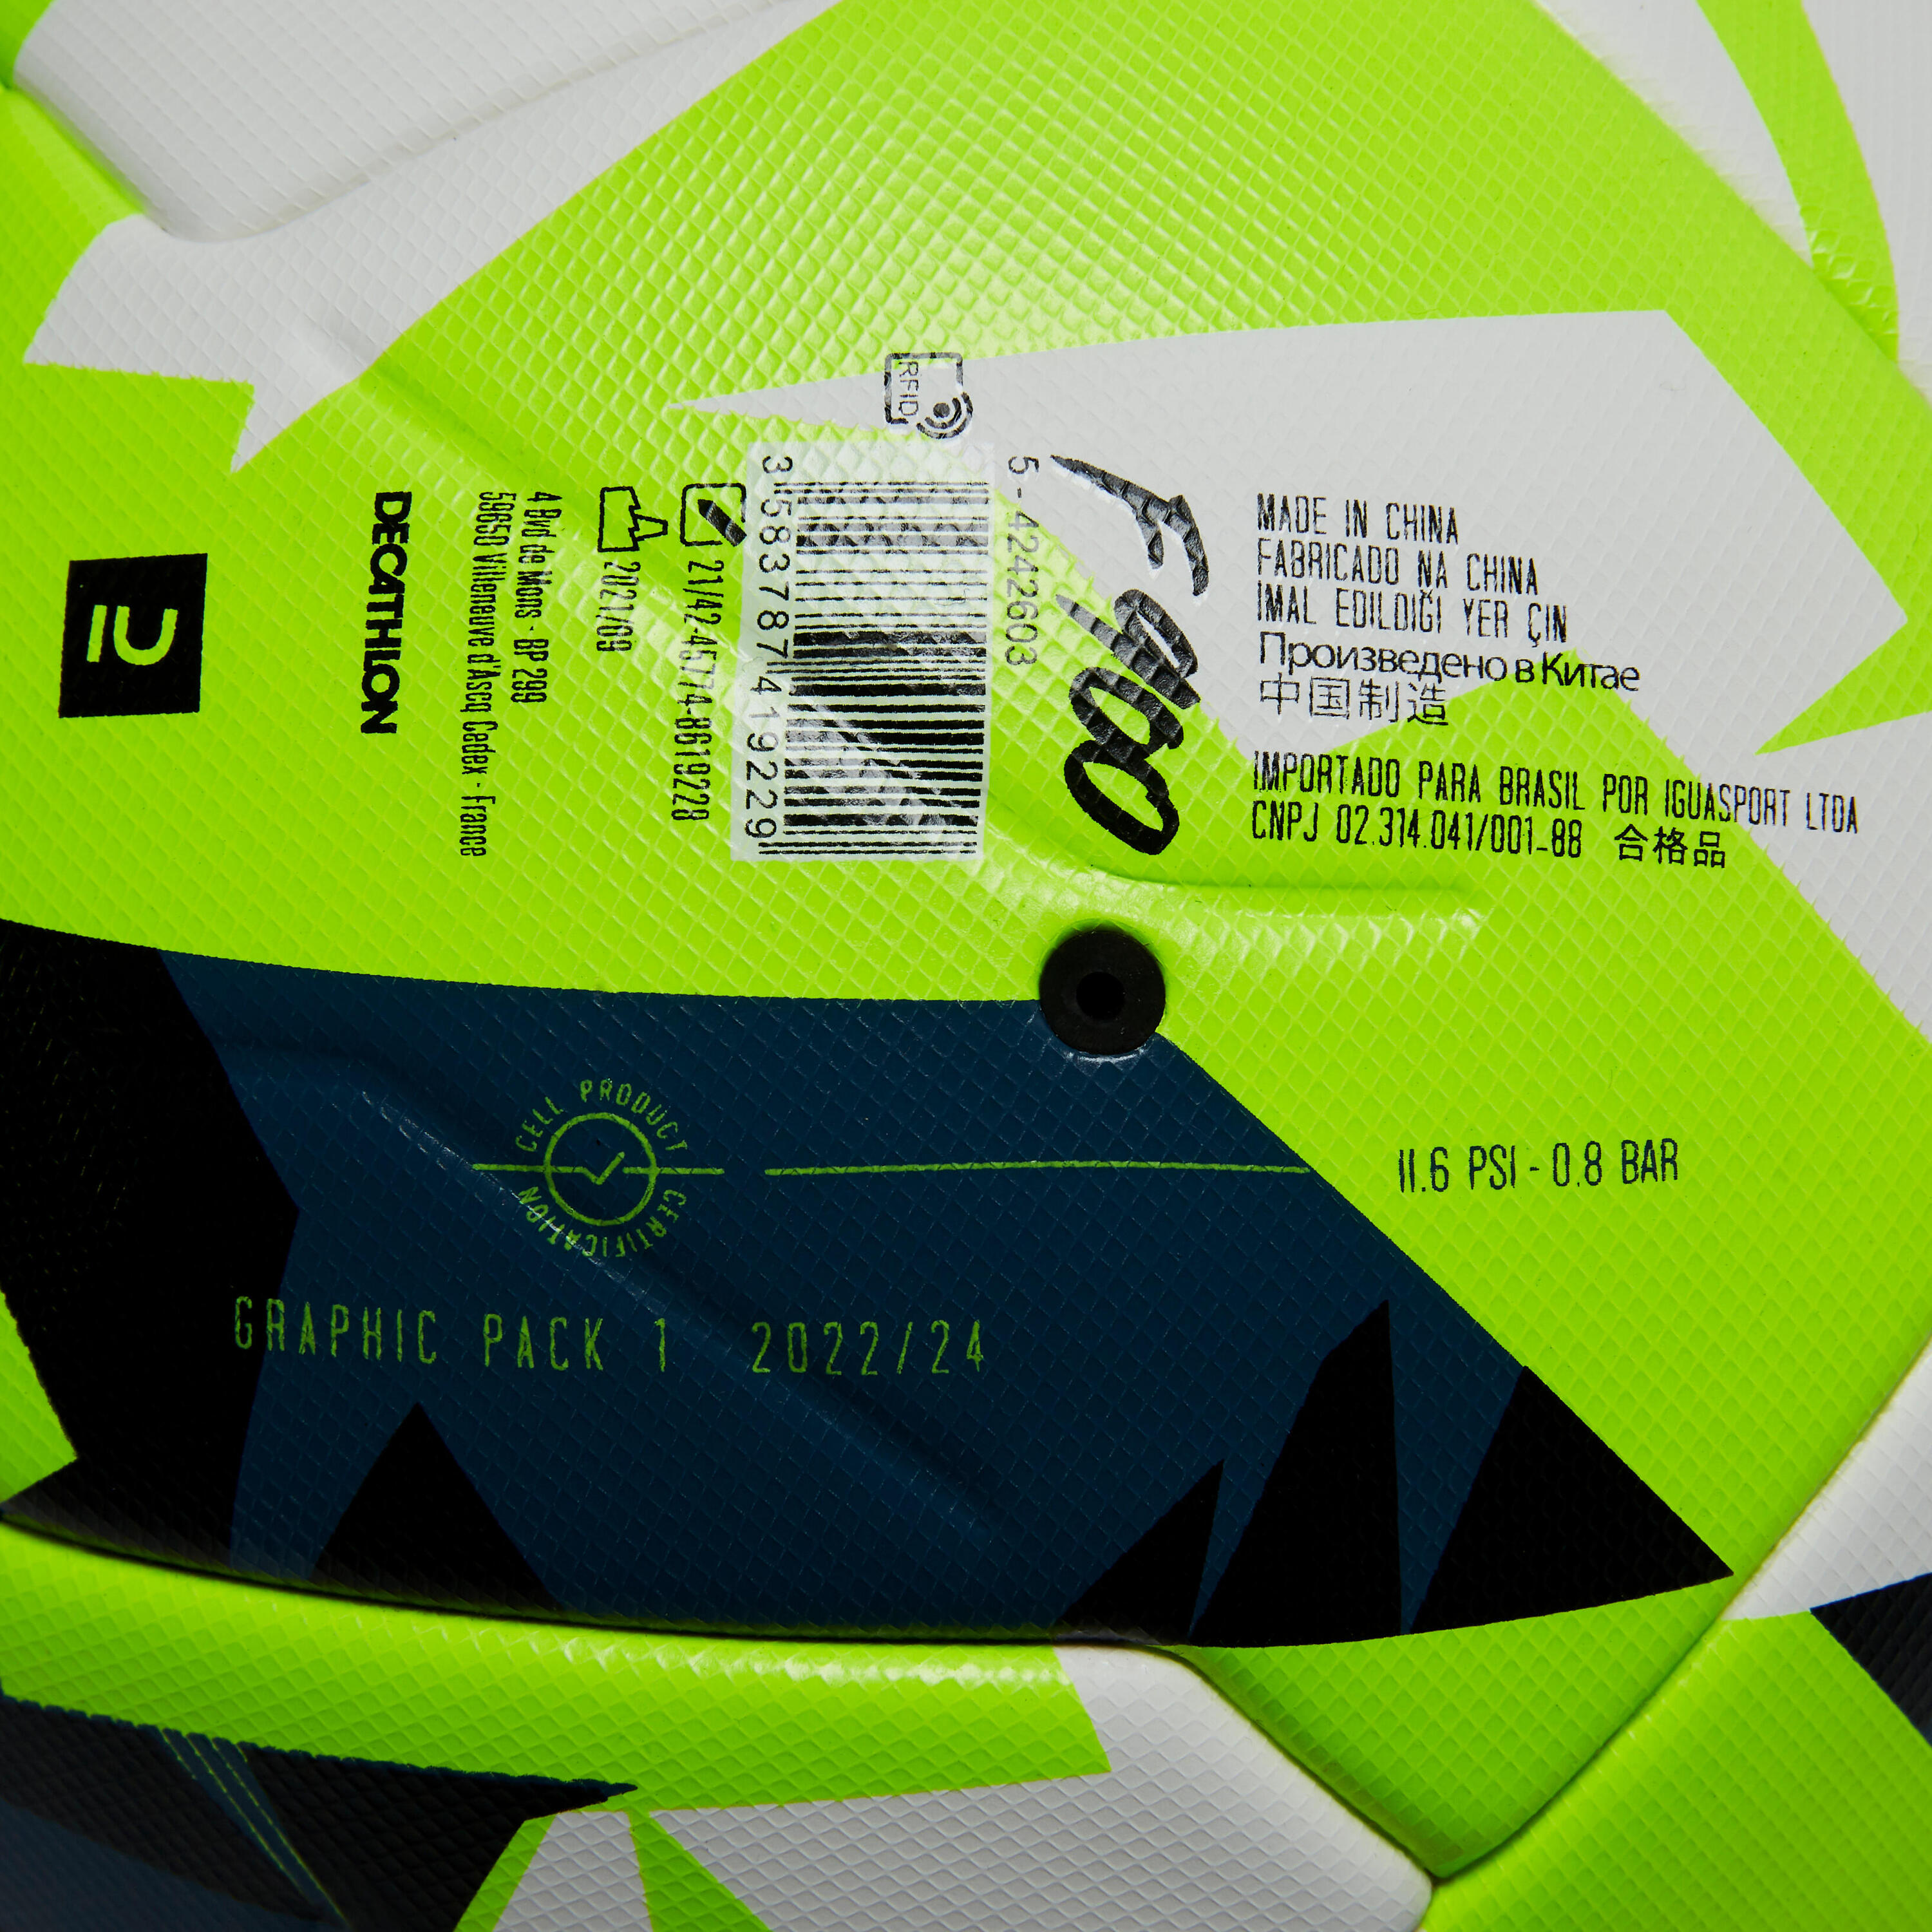 Thermobonded Size 5 Football FIFA Quality Pro F900 - White/Yellow 6/7